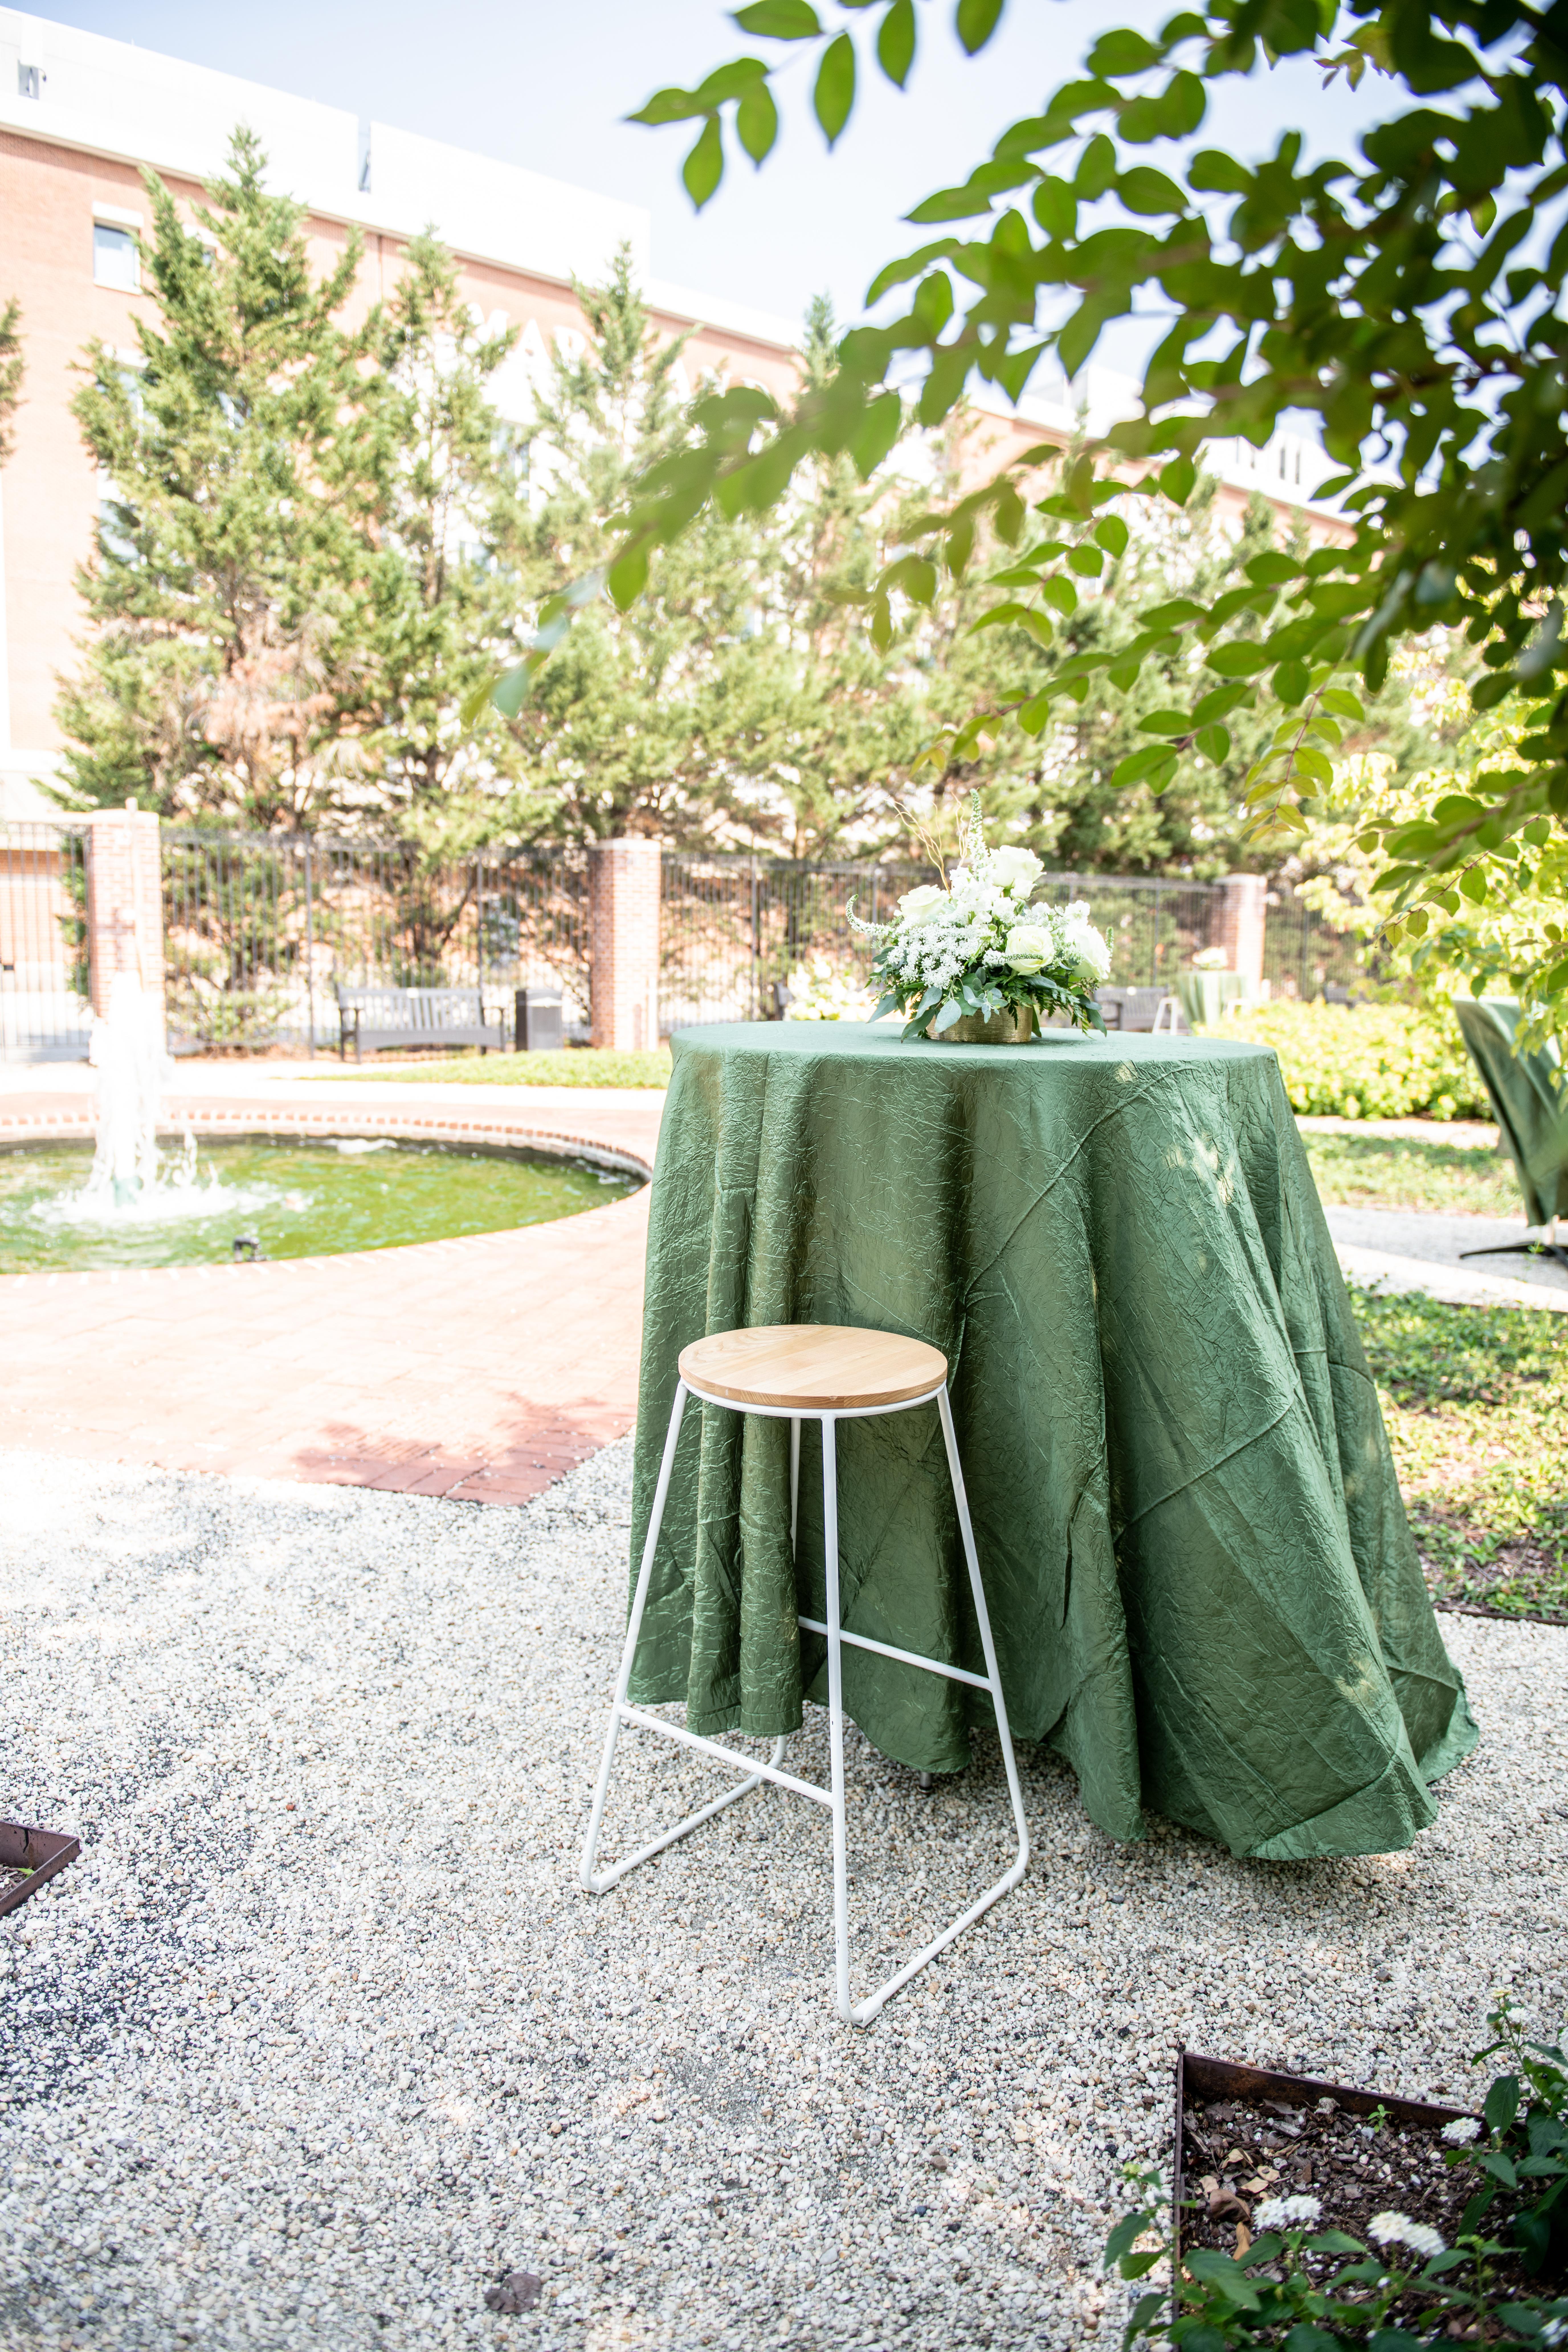 High top table with green linen in garden with fountain in background